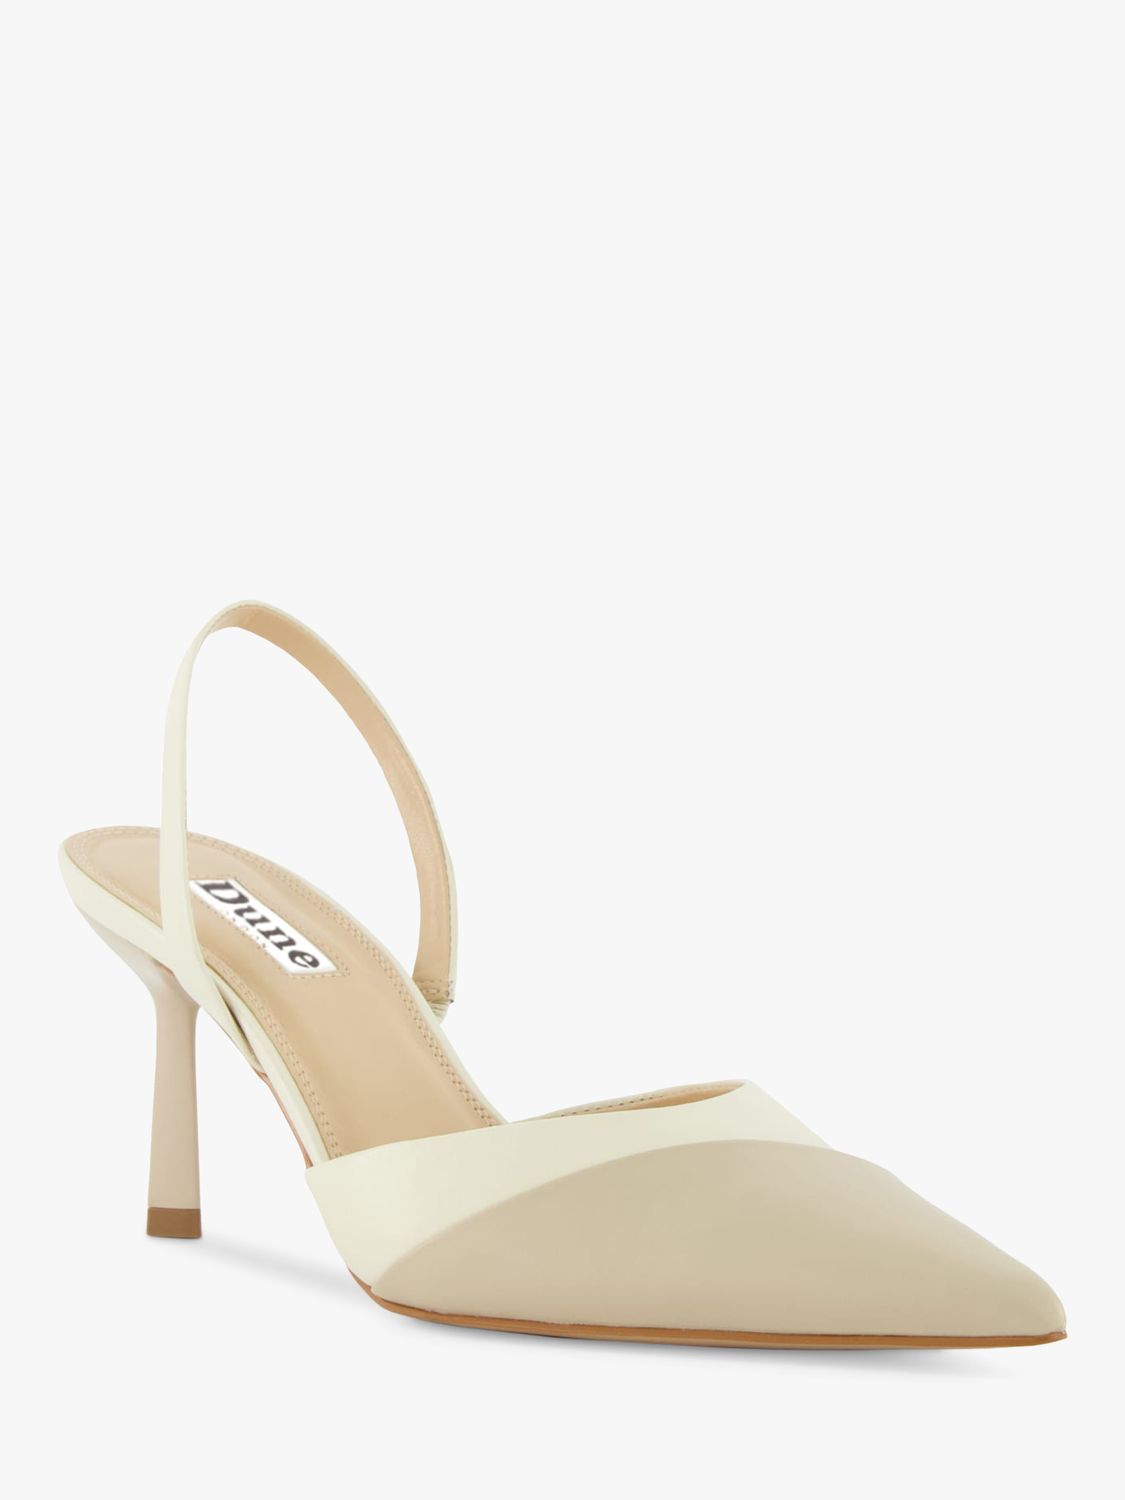 Pointed toe pumps with heels in ecru varnish